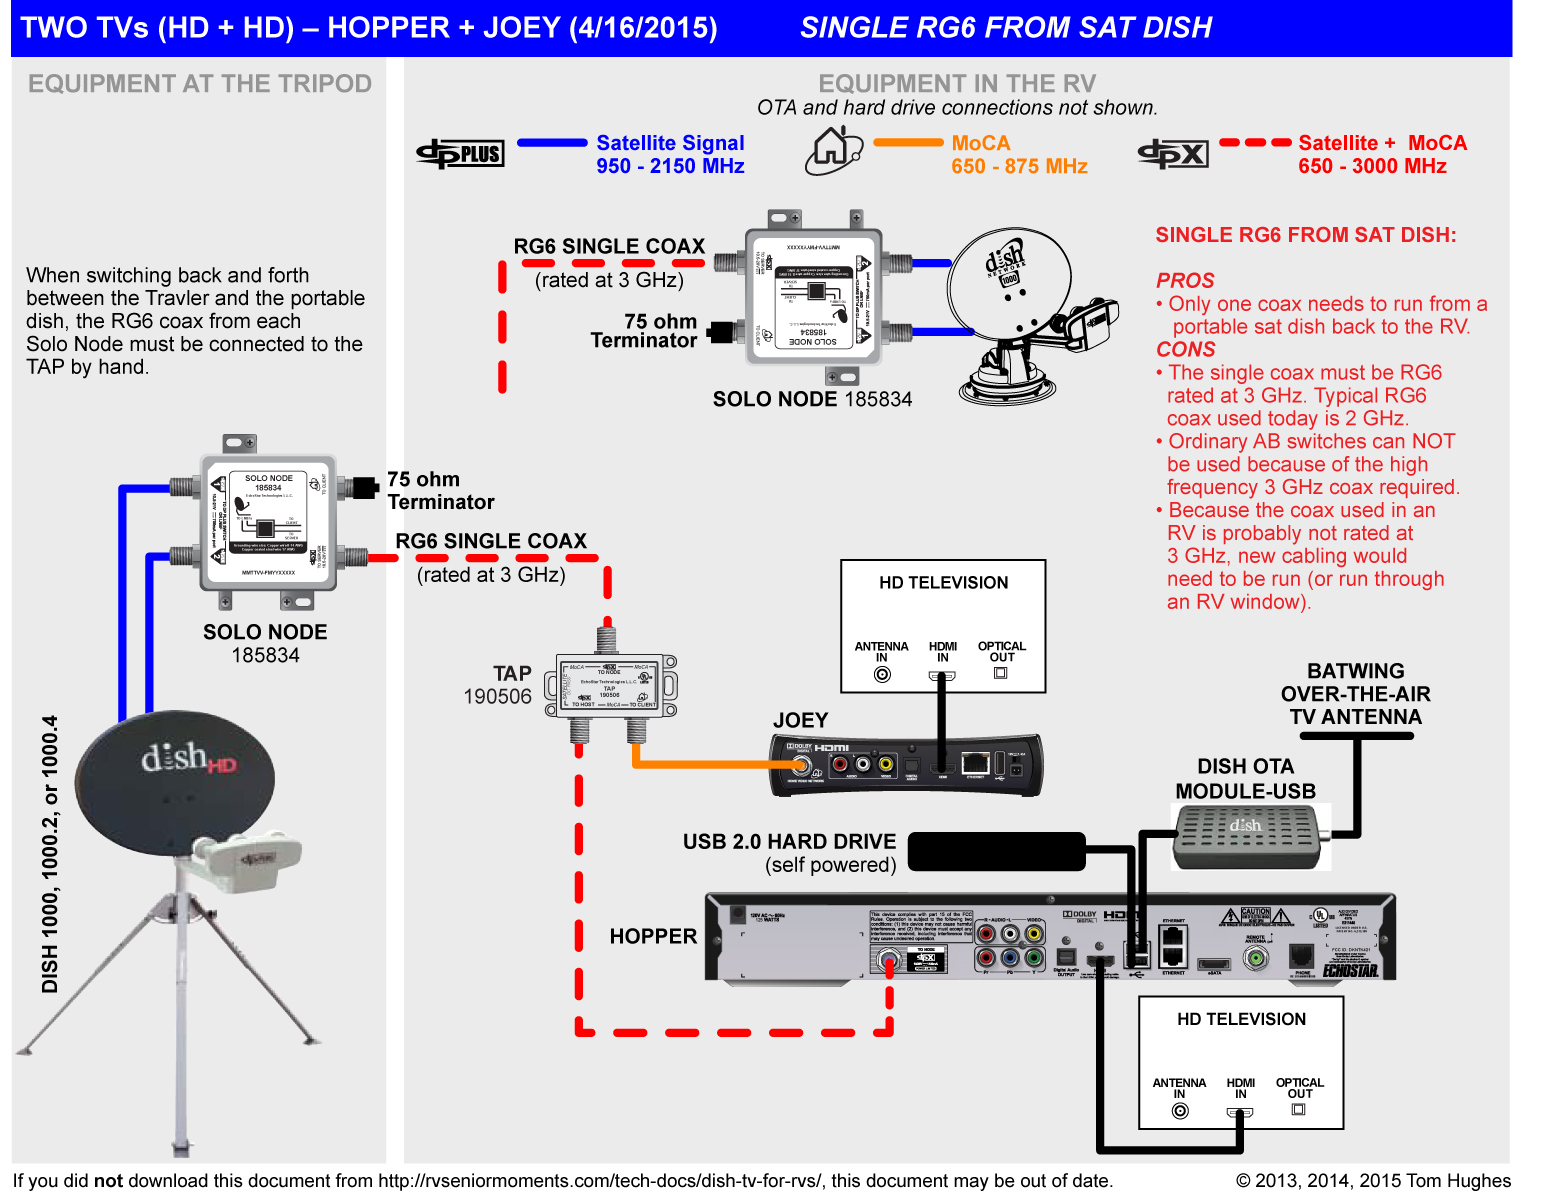 Hook Up Diagram For Dish Joey Sling Receiver To Tv / Dish Hopper 3 Dvr How To Connect Dish Receiver To Tv